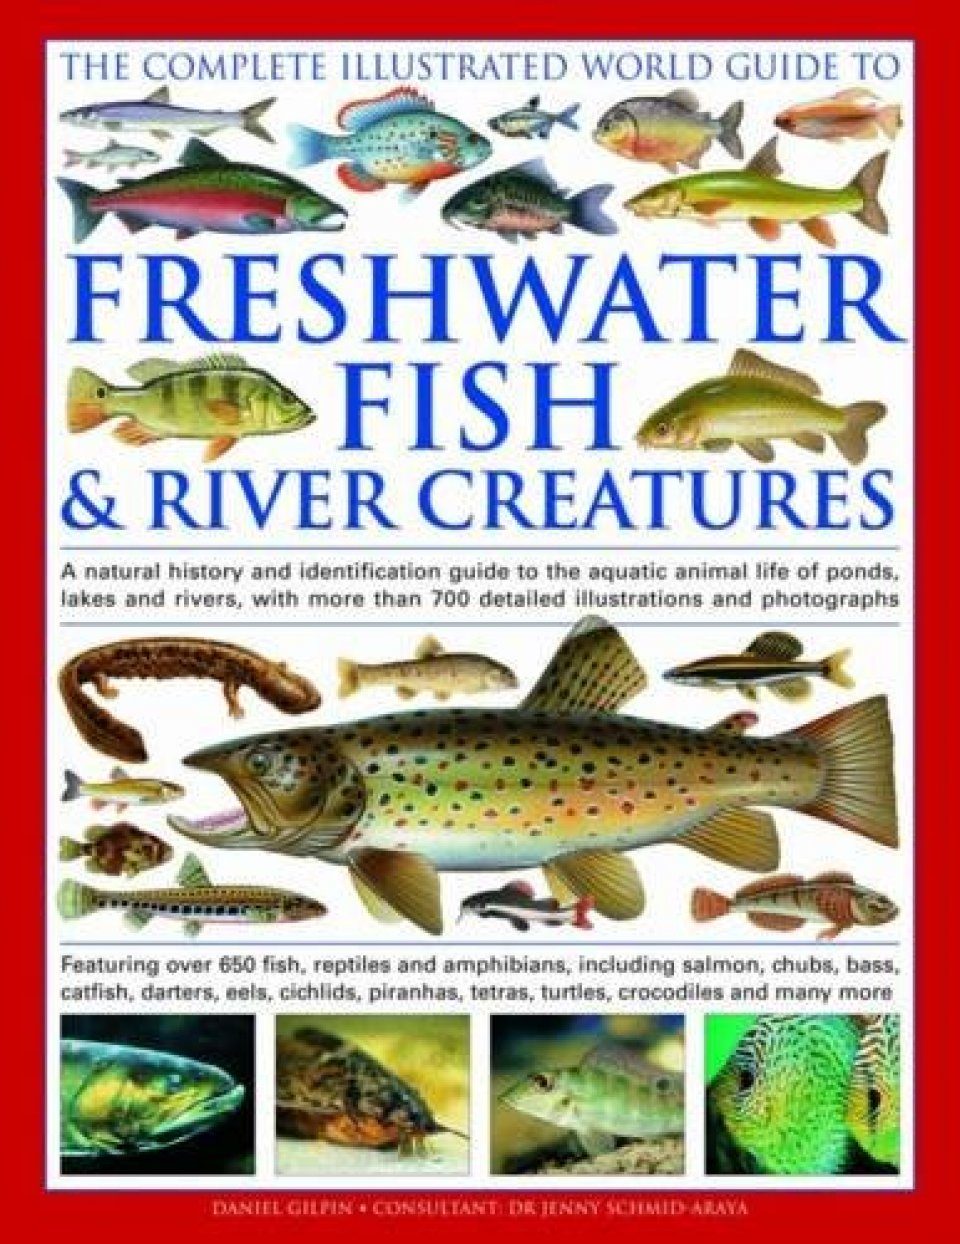 The Complete Illustrated World Guide To Freshwater Fish